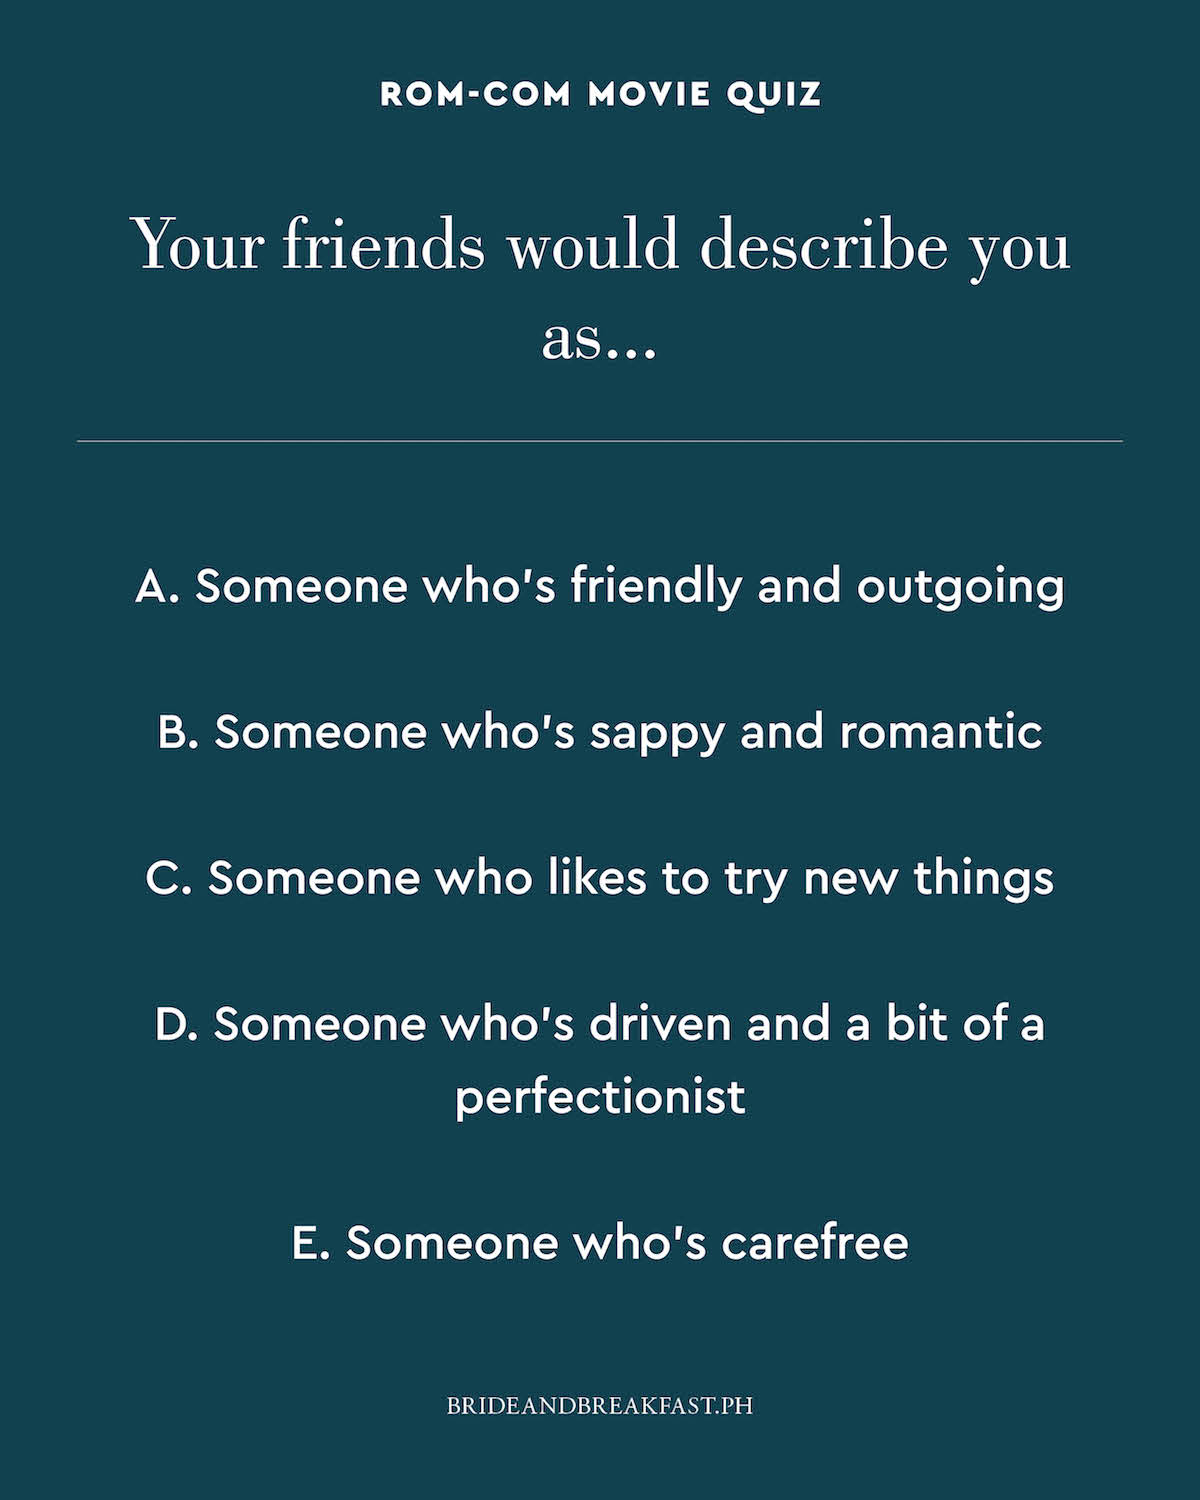 Your friends would describe you as... A. Someone who's friendly and outgoing B. Someone who's sappy and romantic C. Someone who likes to try new things D. Someone who's driven and a bit of a perfectionist E. Someone who's carefree